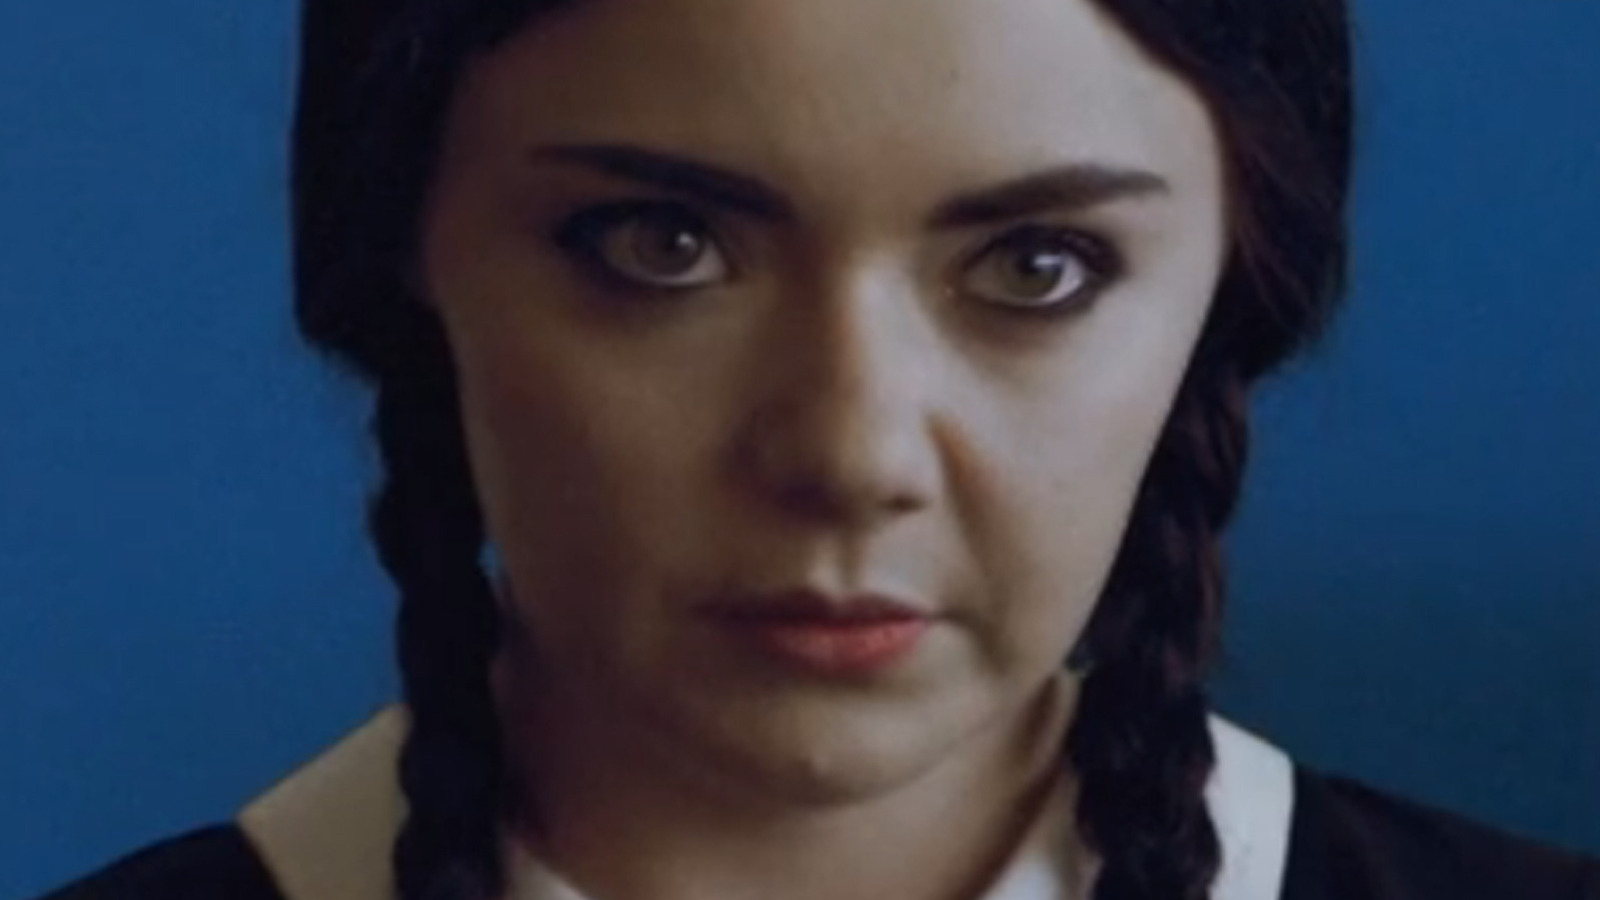 Whatever Happened To The Adult Wednesday Addams YouTube Series?